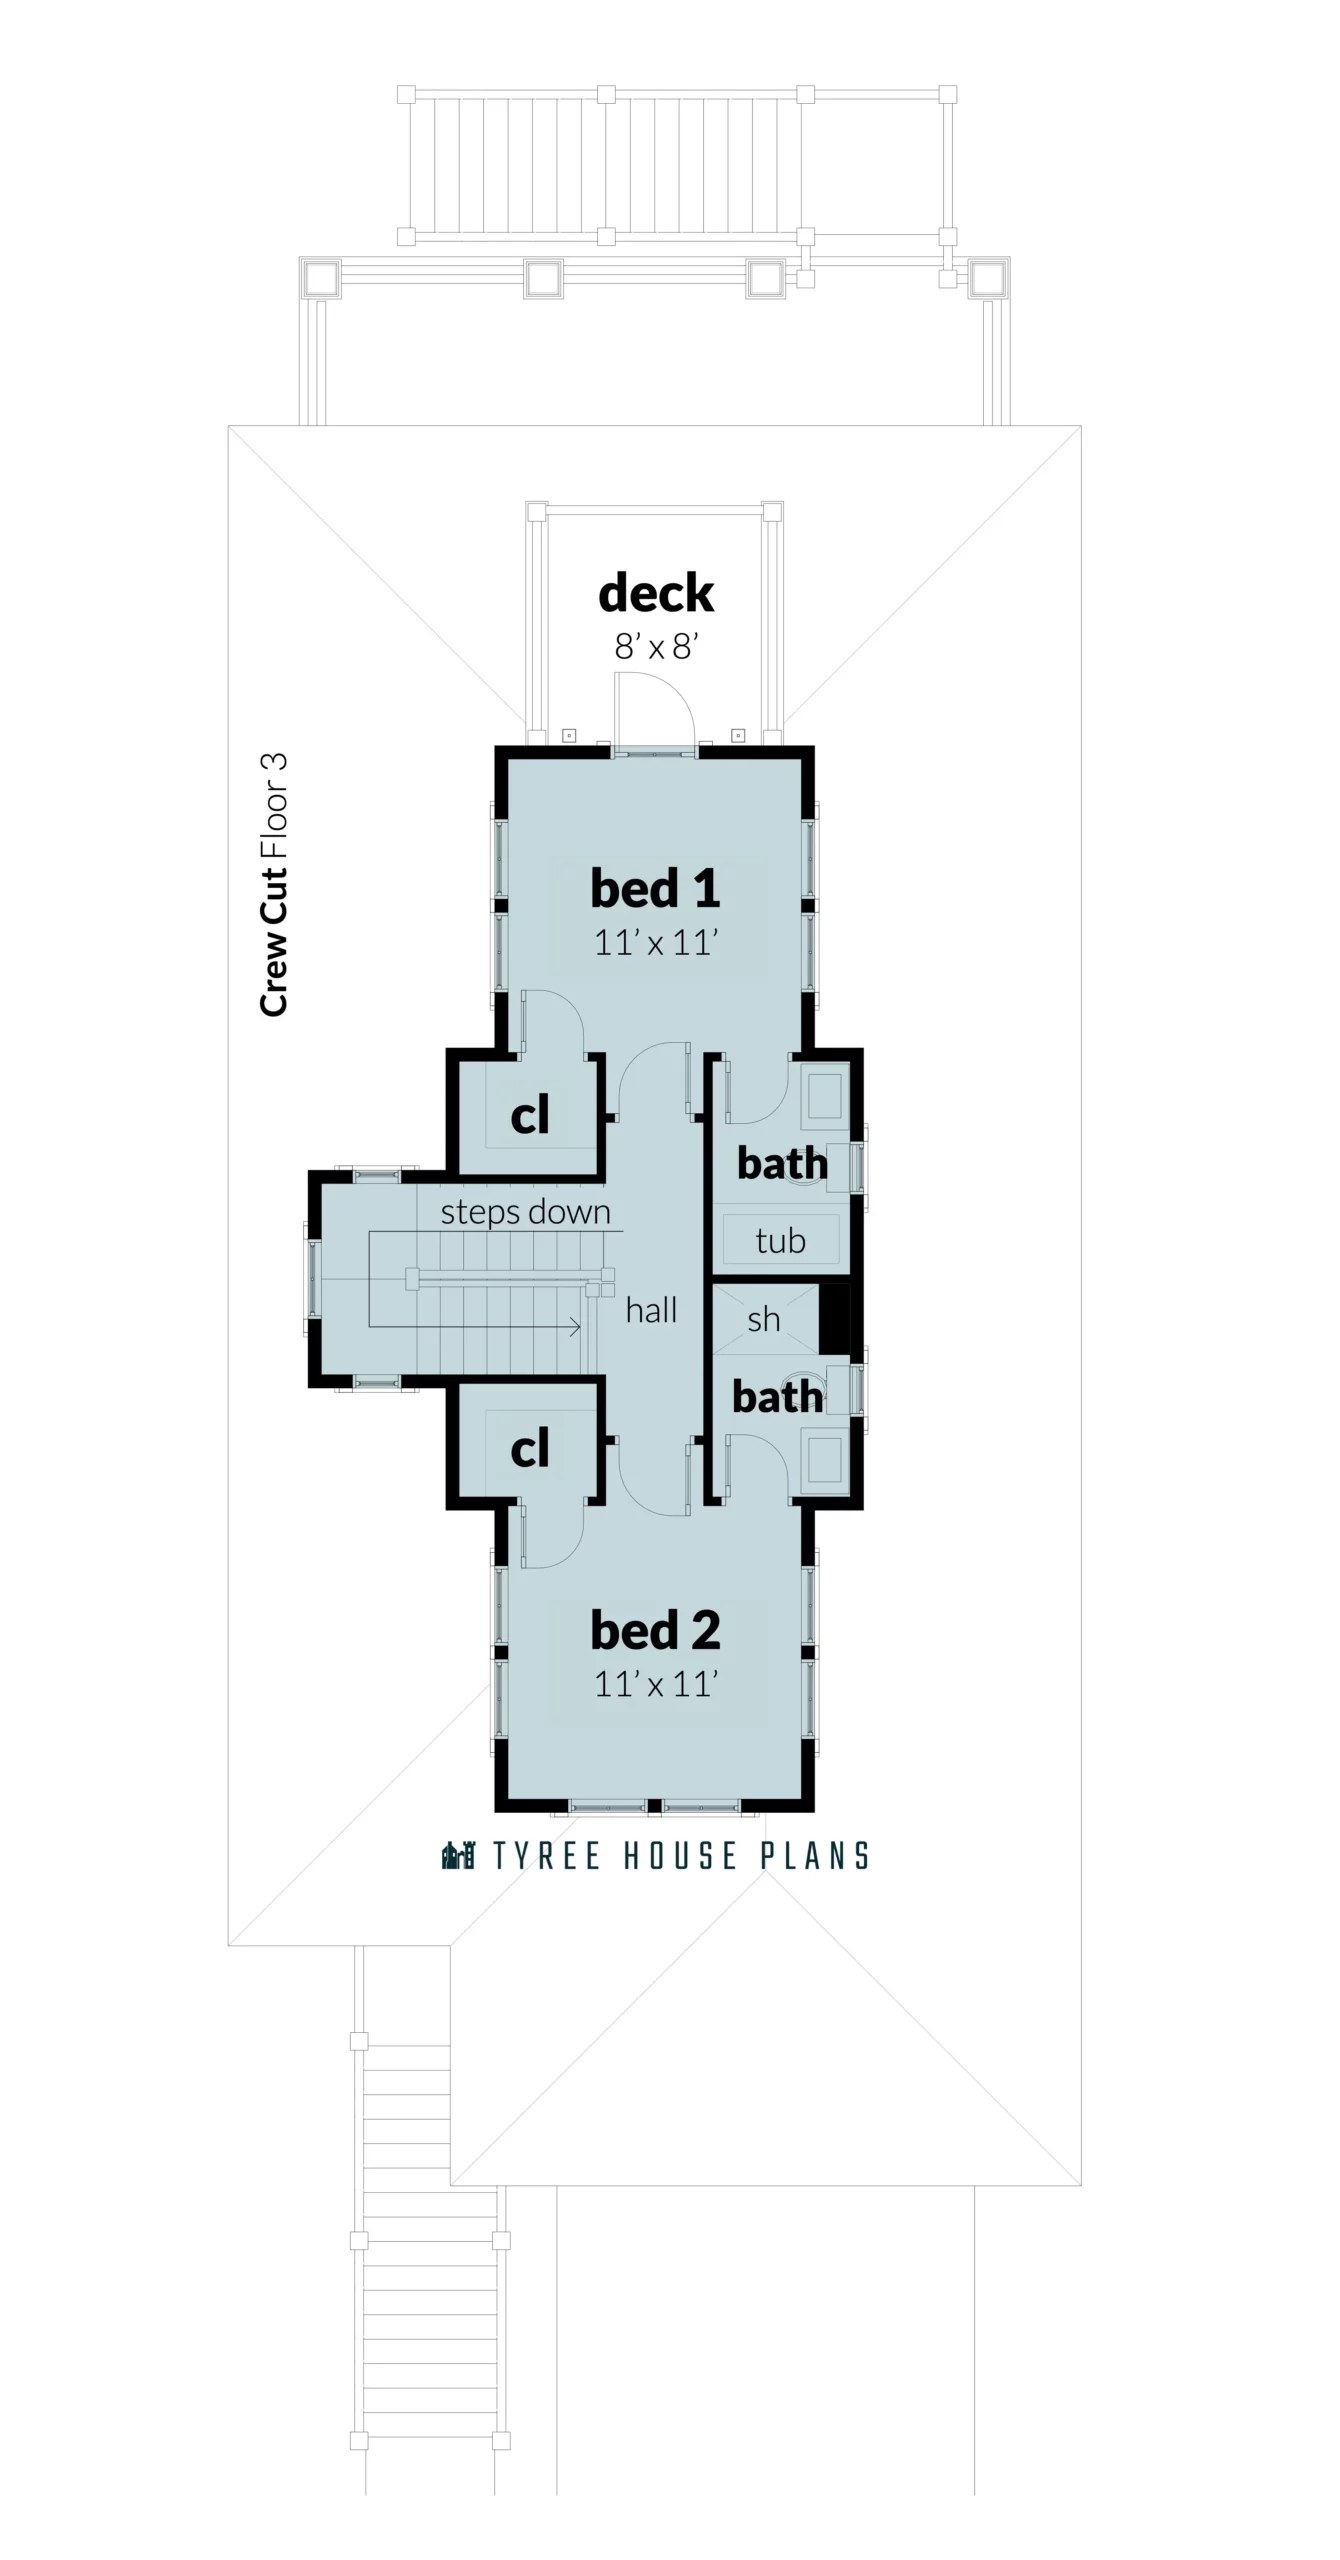 Floor 3 - Crew Cut by Tyree House Plans